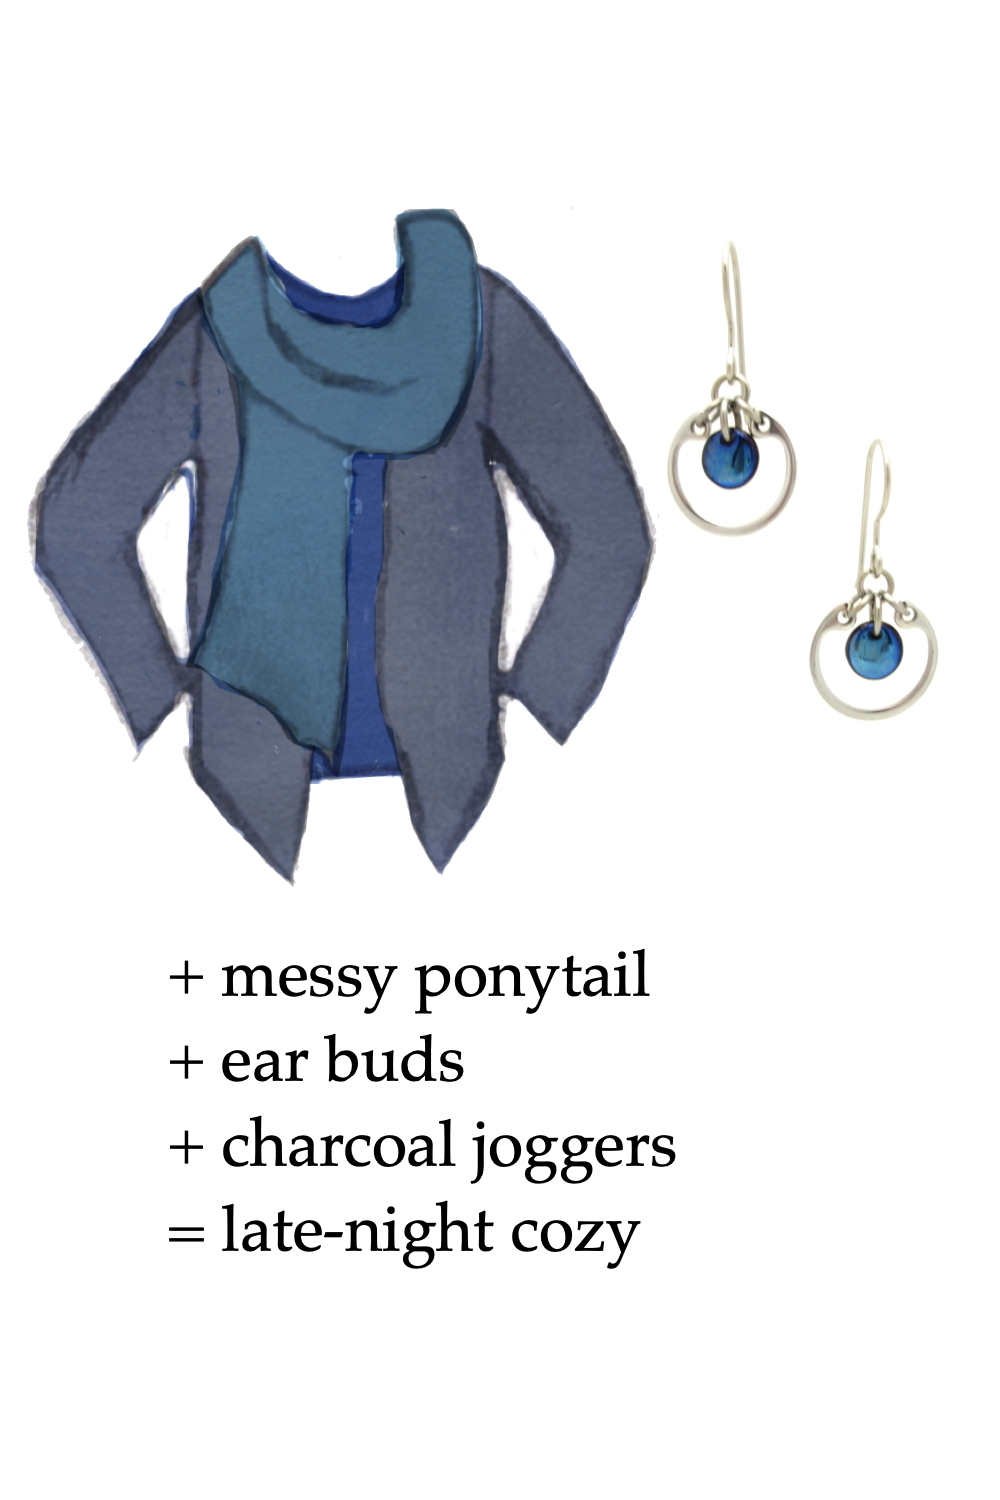 Style sketch of an outfit idea in shades of blue, with a dark blue tee, violet blue scarf, & dusty indigo cardigan, with Wraptillion's small modern circle earrings in navy blue. Text on image reads: + messy ponytail + ear buds + charcoal joggers = late-night cozy